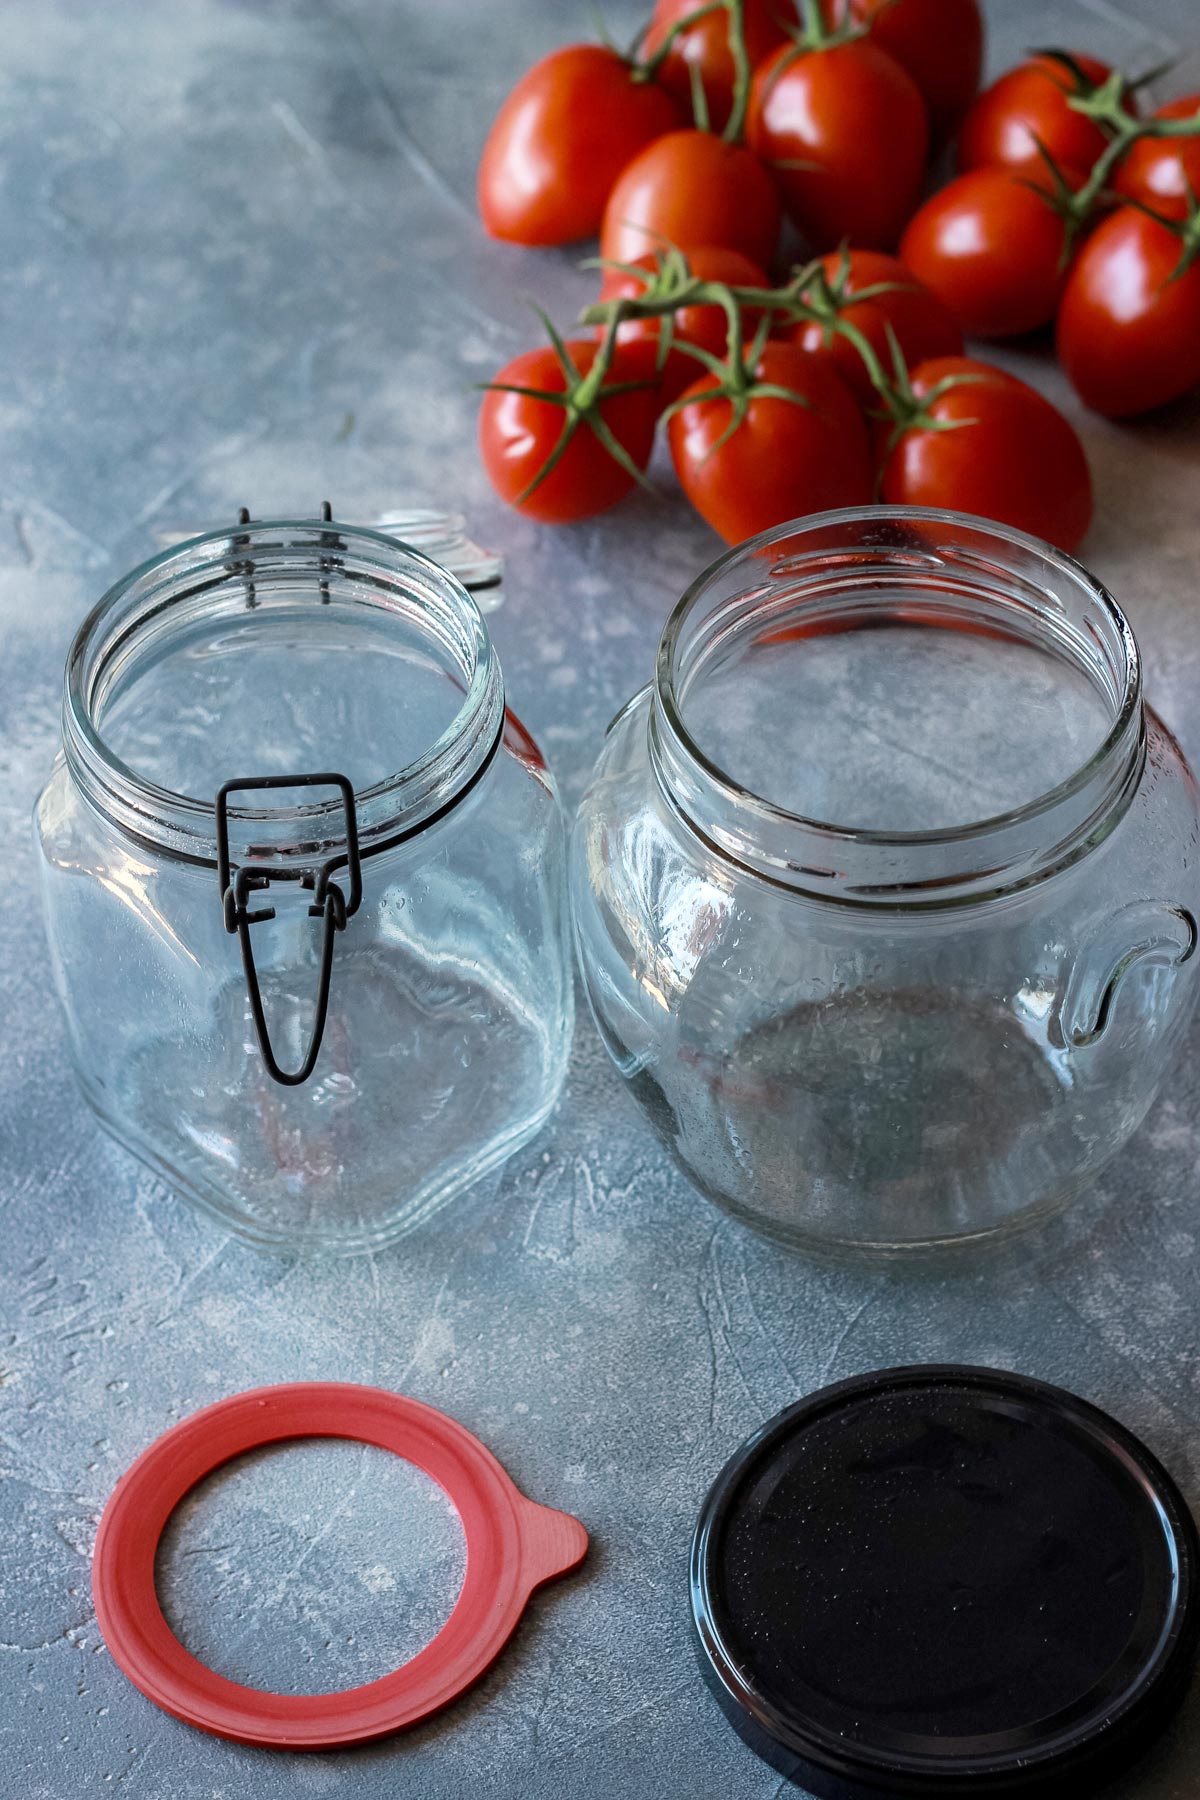 Sterilized jars for canning tomatoes.